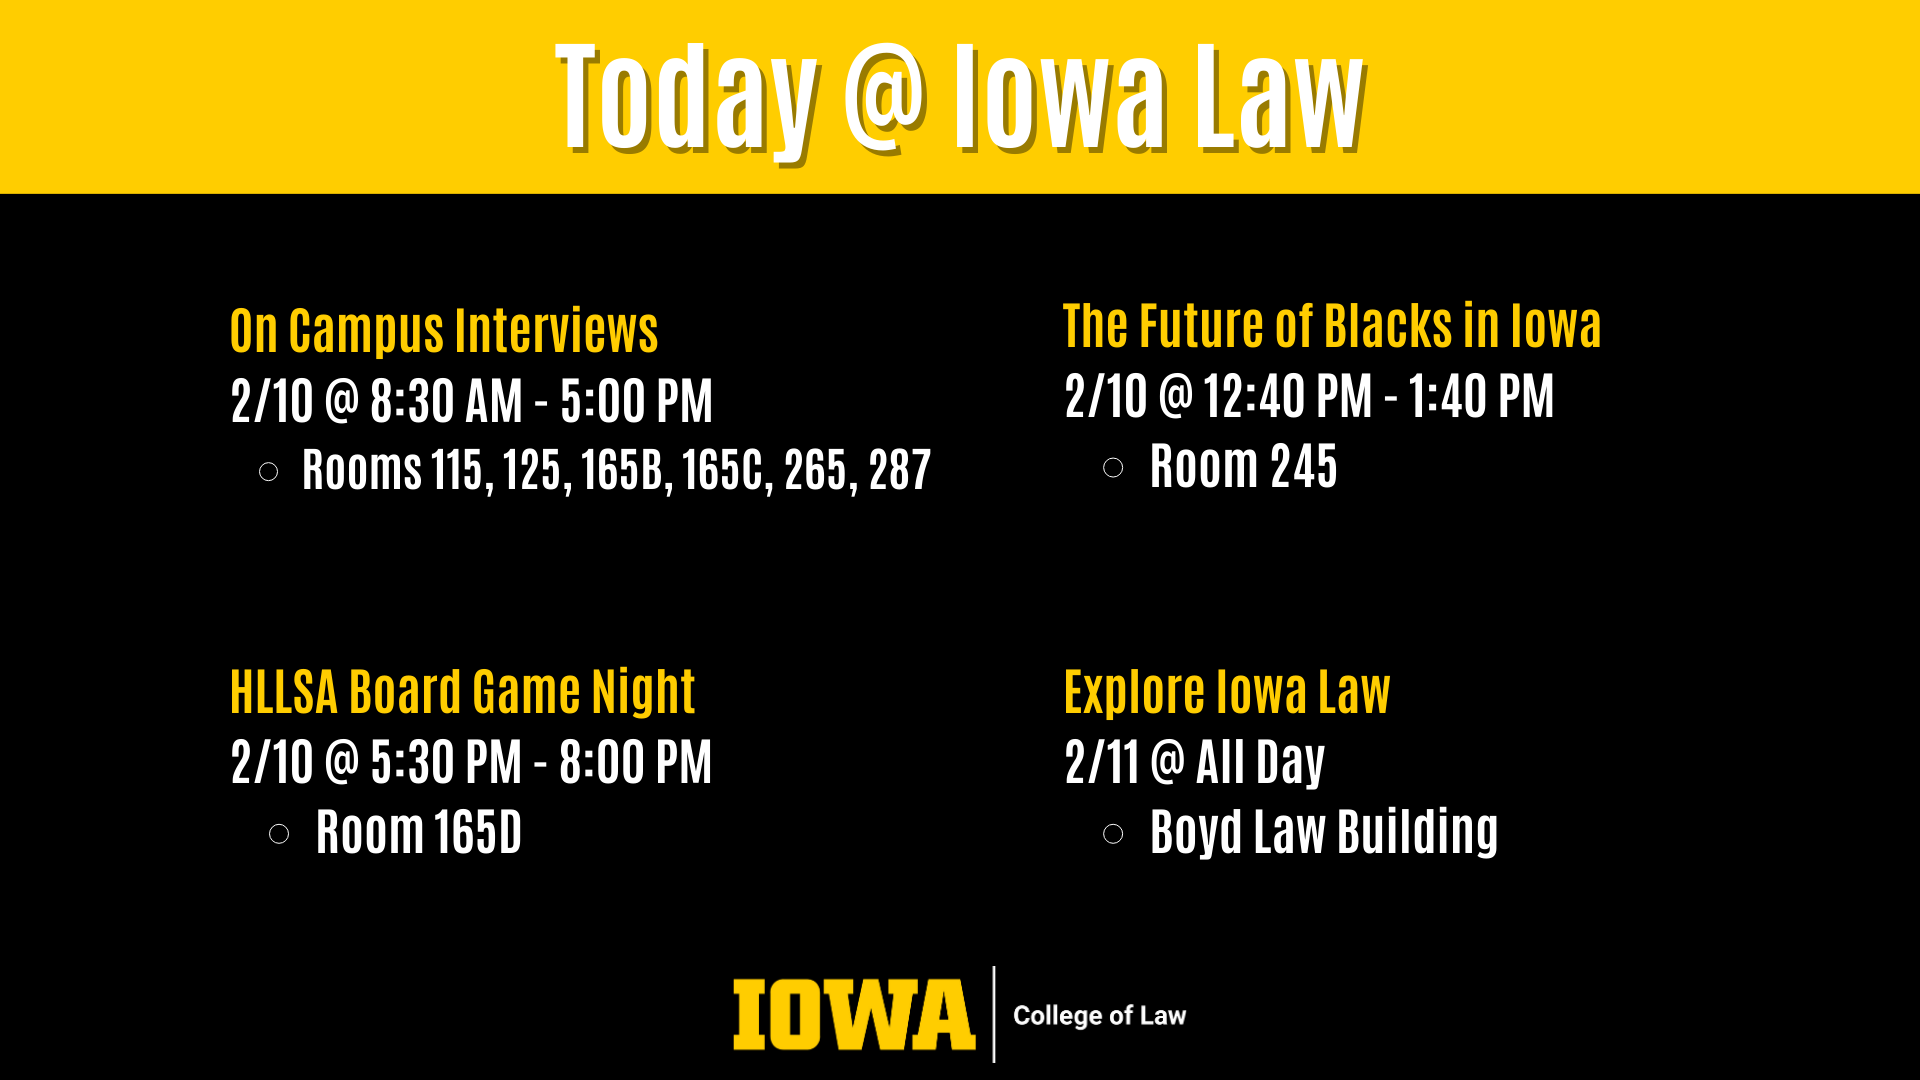 Today @ Iowa Law On Campus Interviews  2/10 @ 8:30 AM - 5:00 PM  Rooms 115, 125, 165B, 165C, 265, 287 The Future of Blacks in Iowa 2/10 @ 12:40 PM - 1:40 PM Room 245 HLLSA Board Game Night 2/10 @ 5:30 PM - 8:00 PM Room 165D Explore Iowa Law 2/11 @ All Day Boyd Law Building